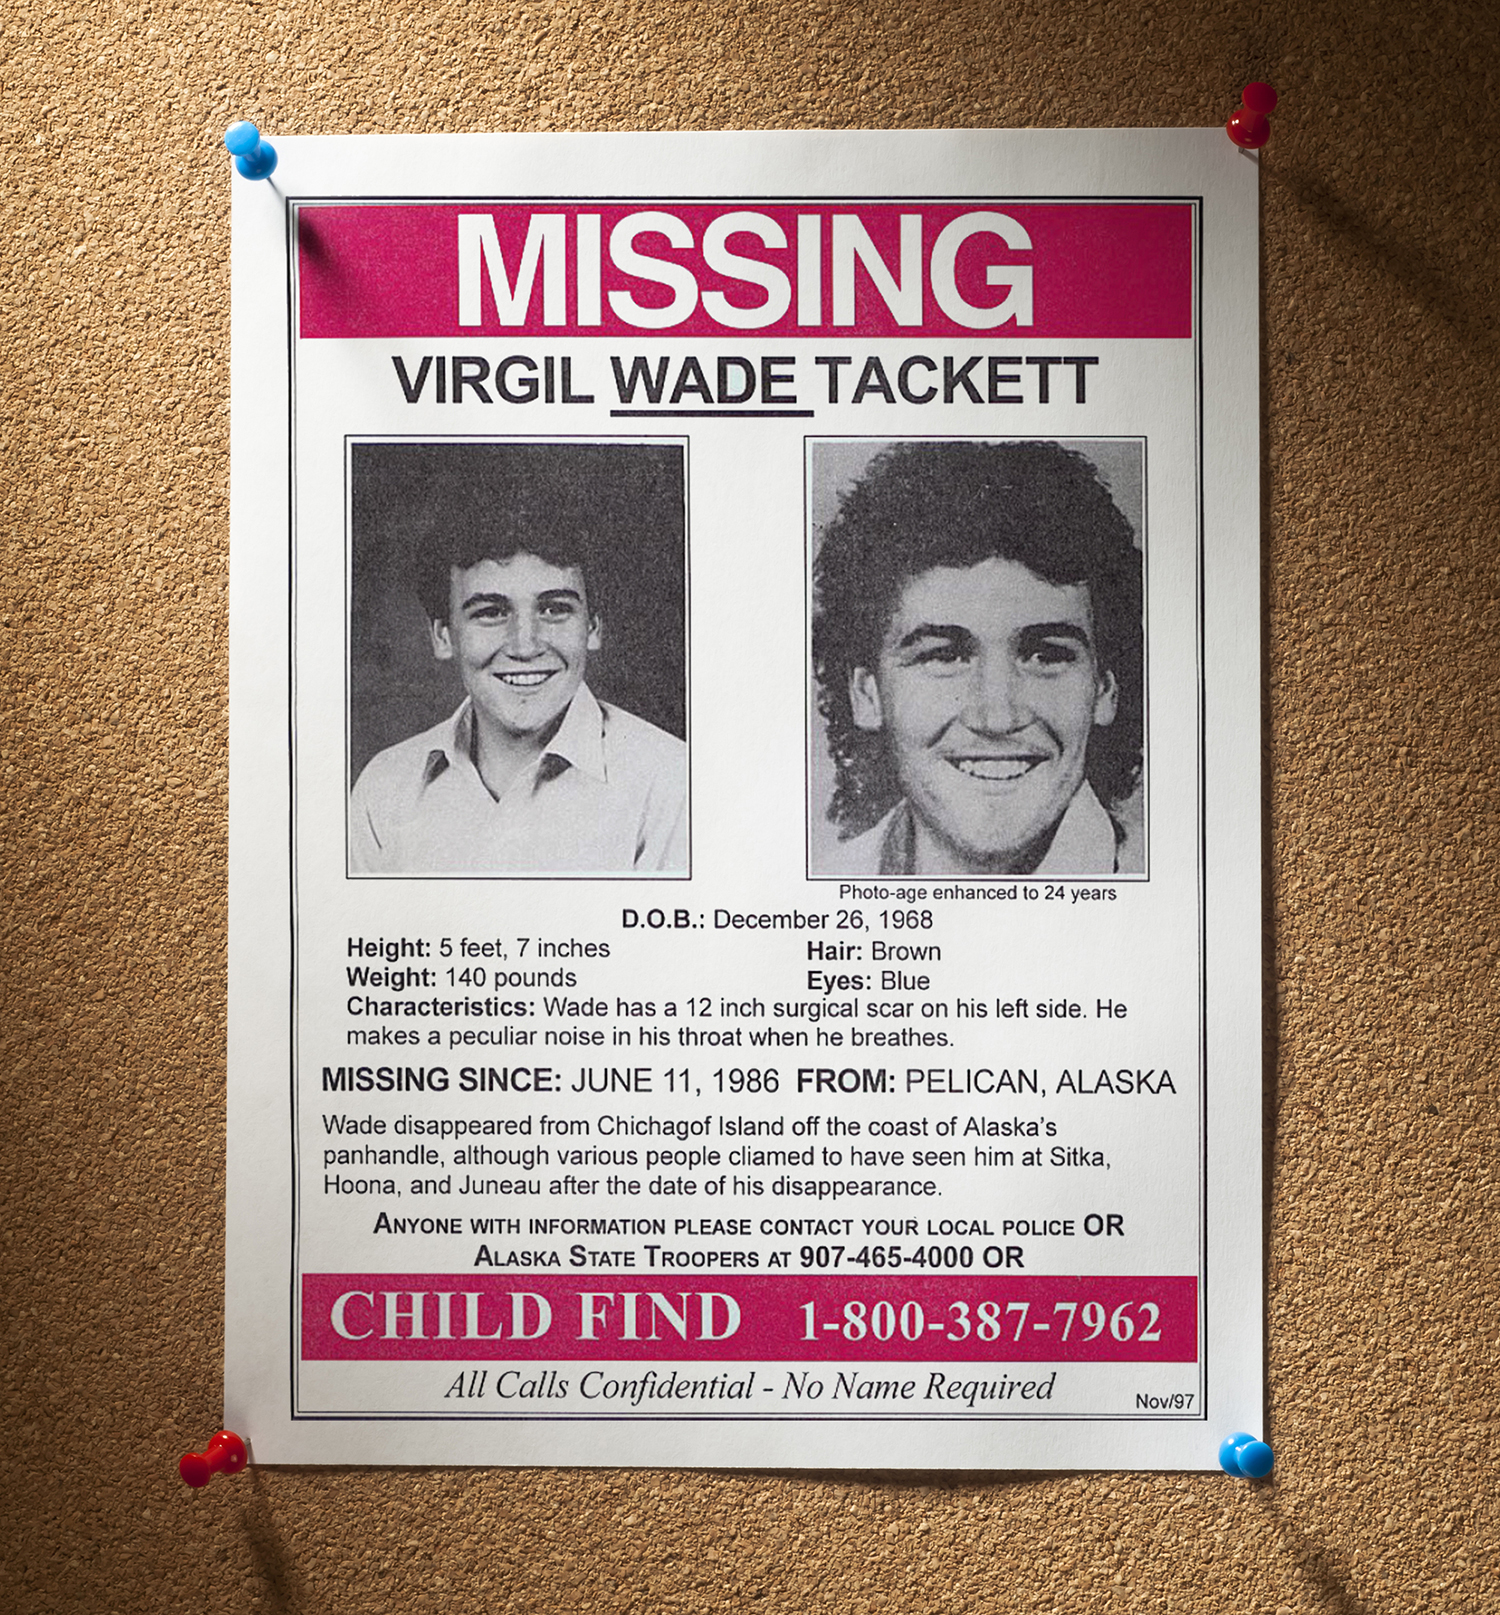 Psychics, Spirits, and a Decades-Long Search: The Bizarre Disappearance of Wade Tackett